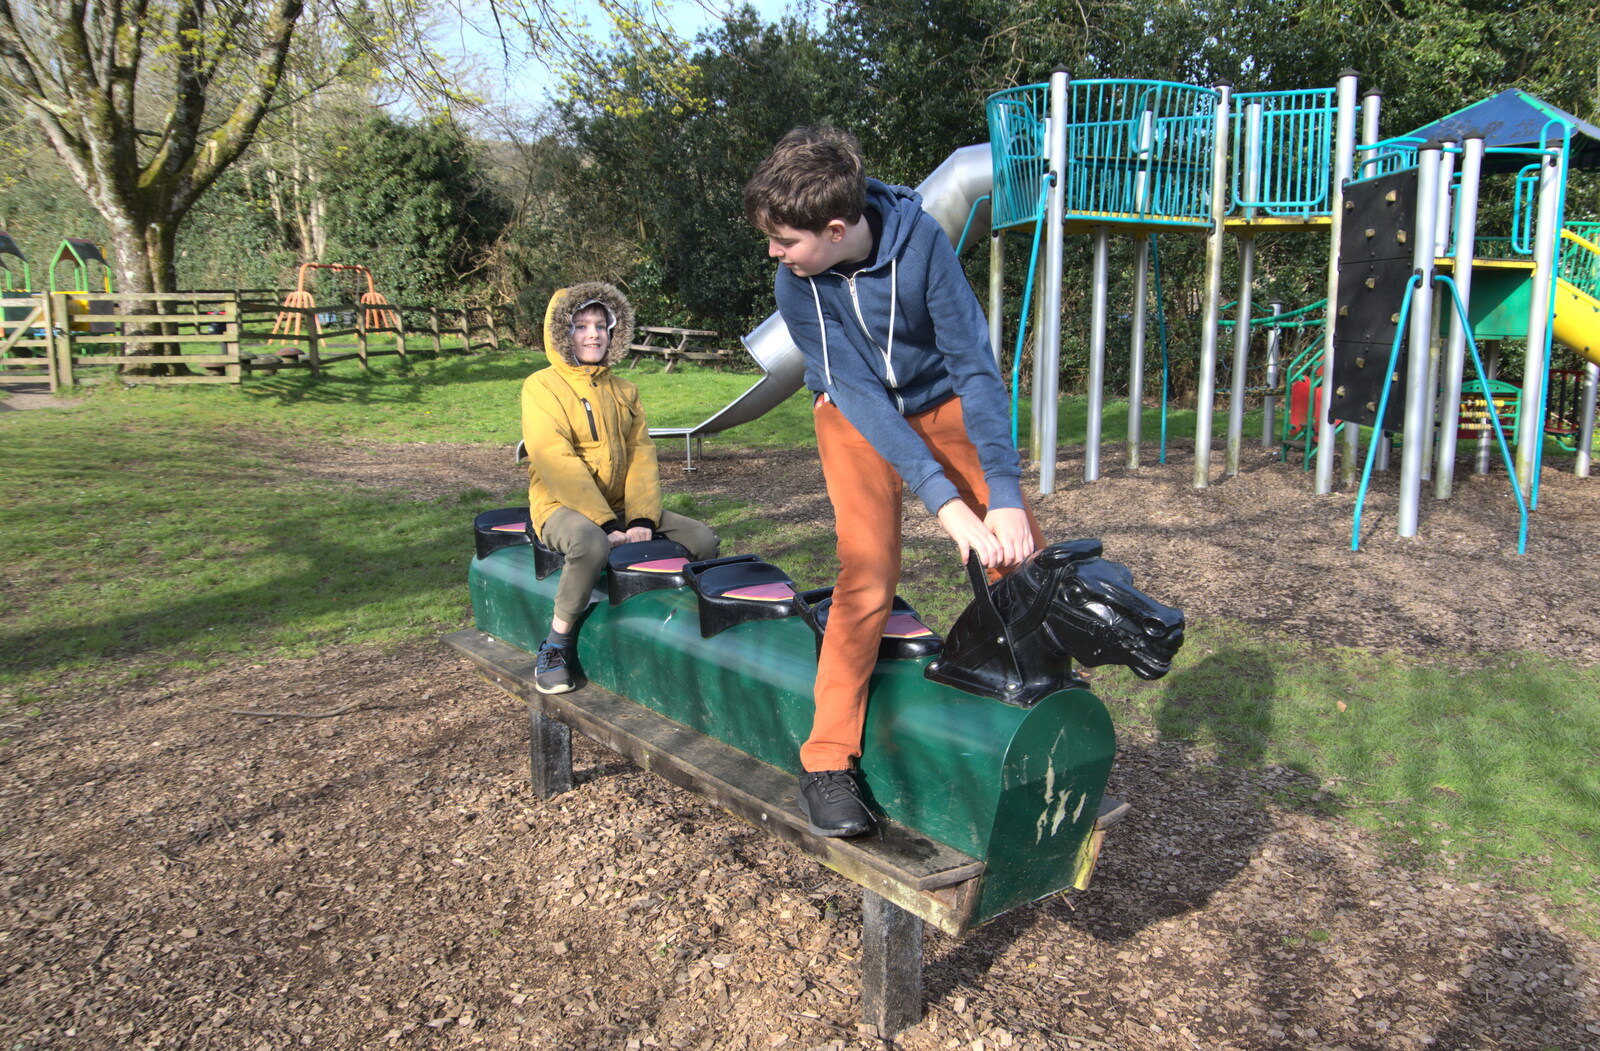 The boys try out an old-school rocking horse from Easter in South Zeal and Moretonhampstead, Devon - 9th April